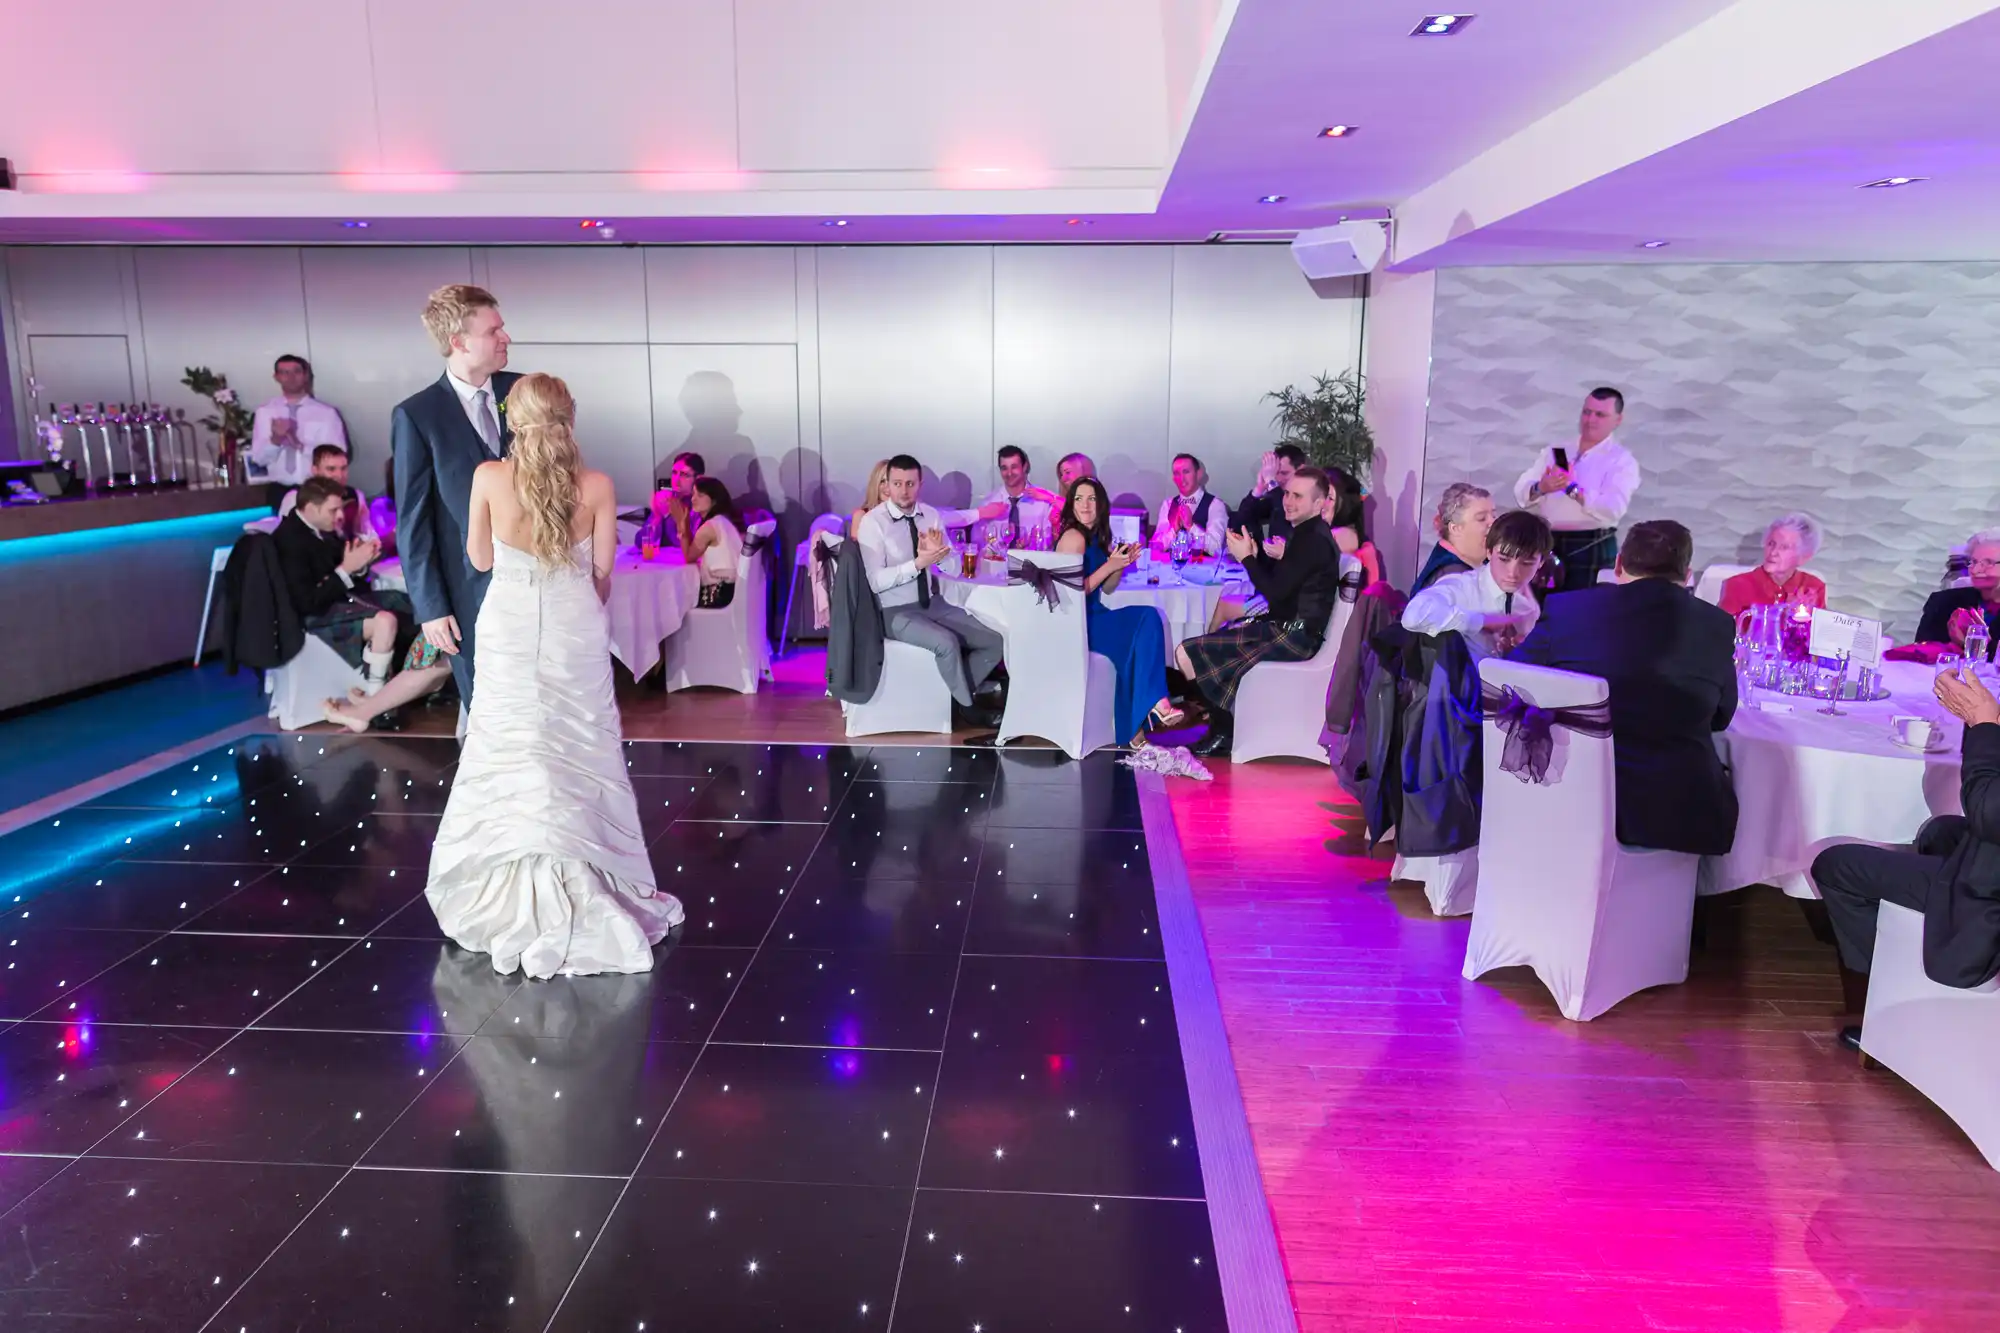 Bride and groom sharing their first dance at a wedding reception with guests seated around the dance floor.